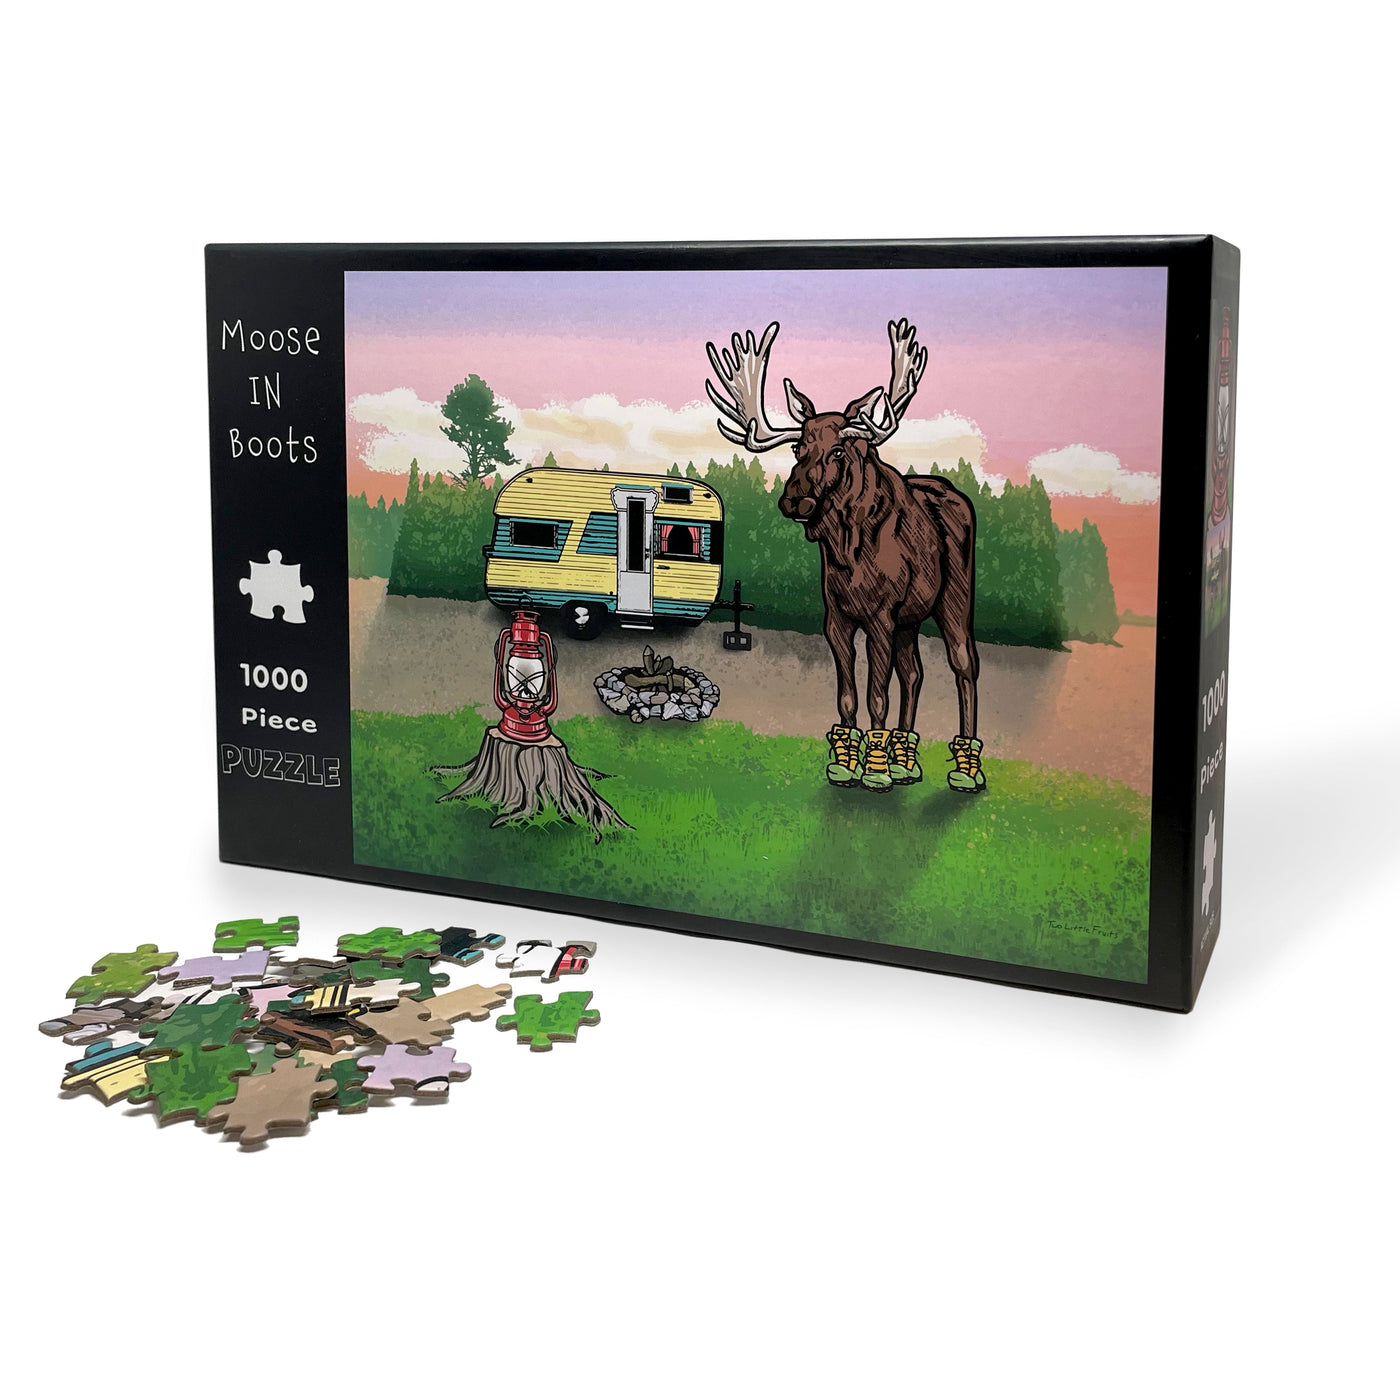 Moose in Boots | 1,000 Piece Jigsaw Puzzle